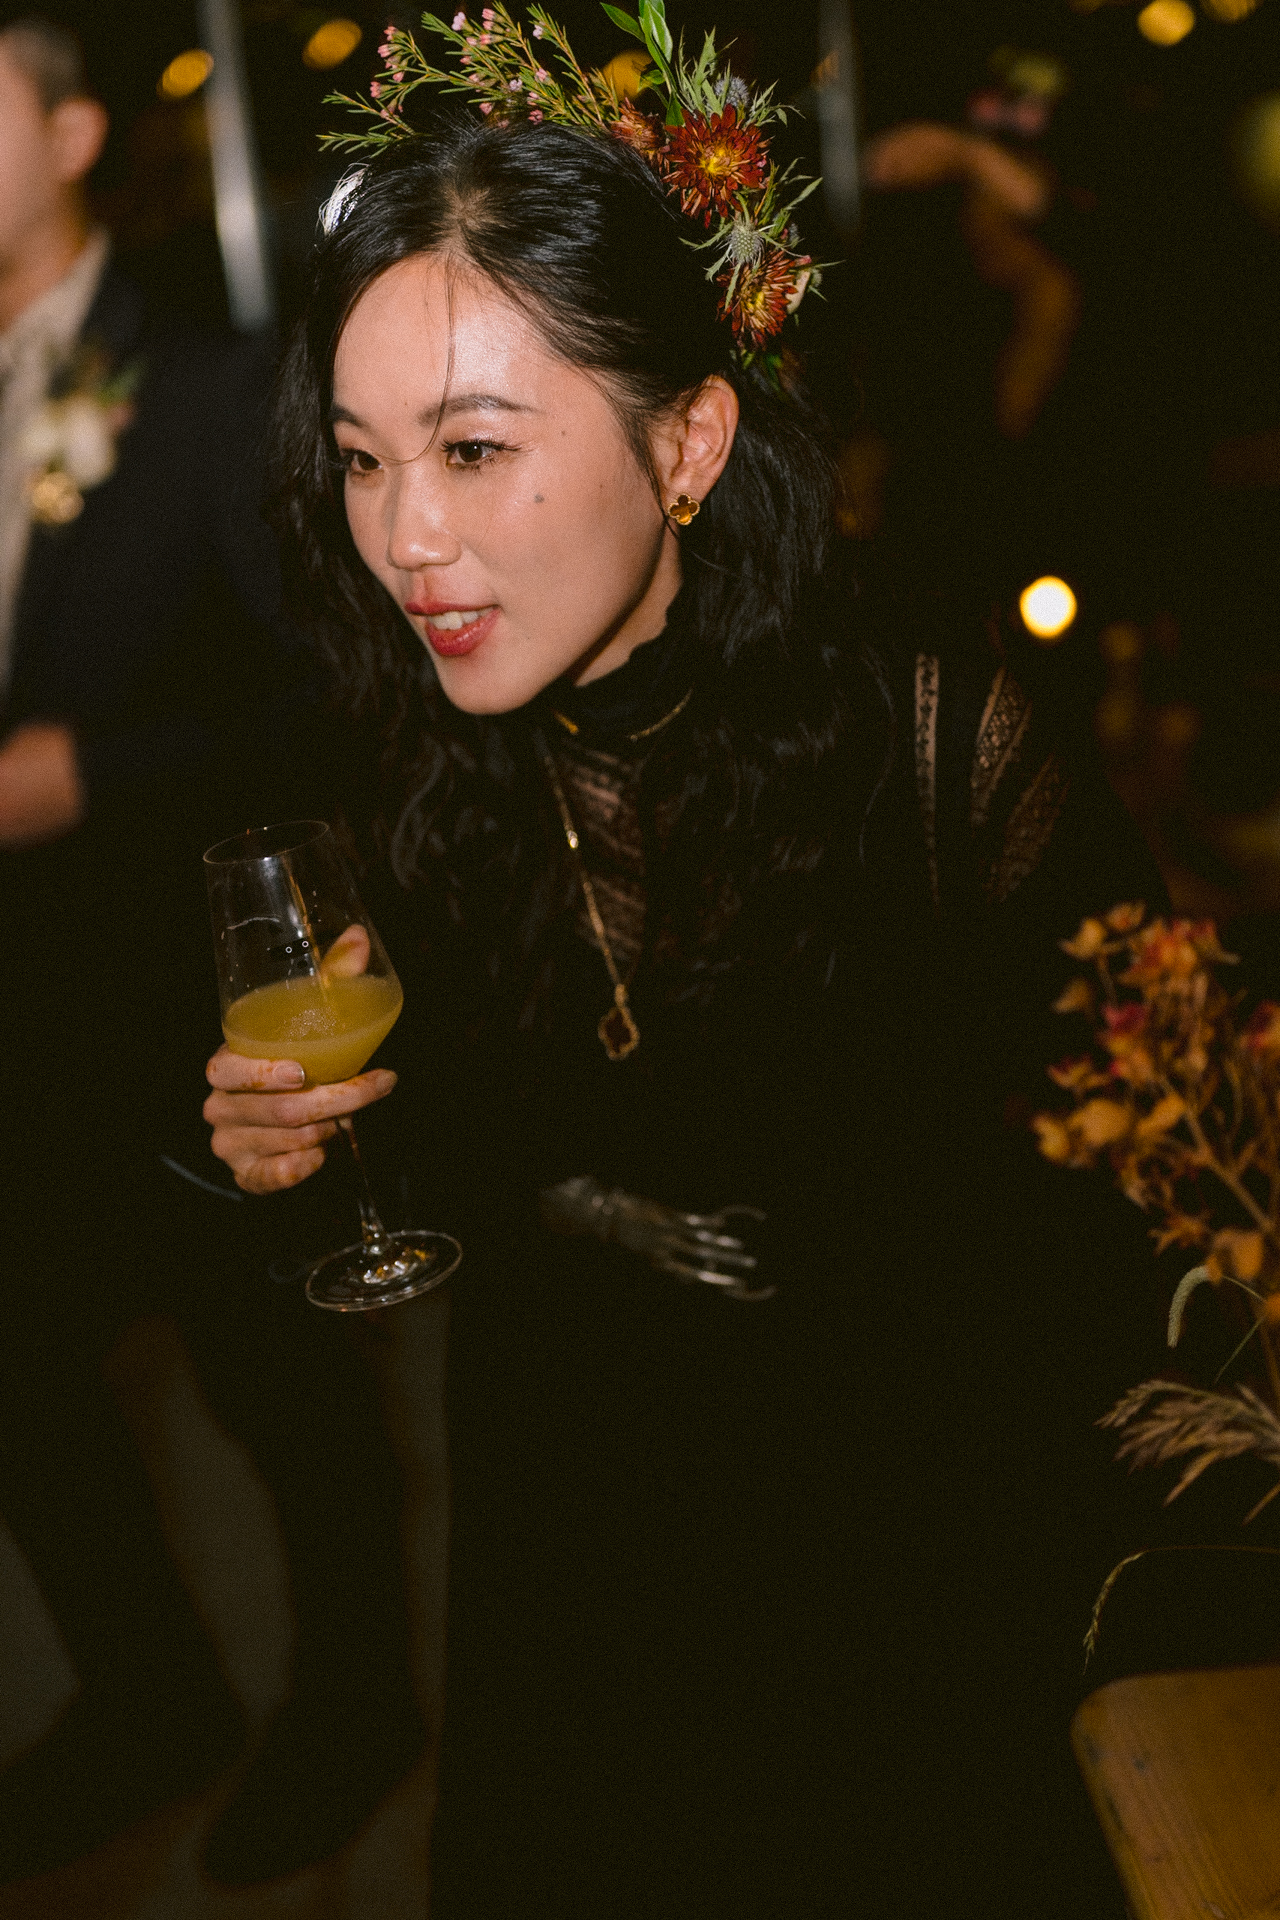 Woman with a floral headpiece holding a glass at an event.